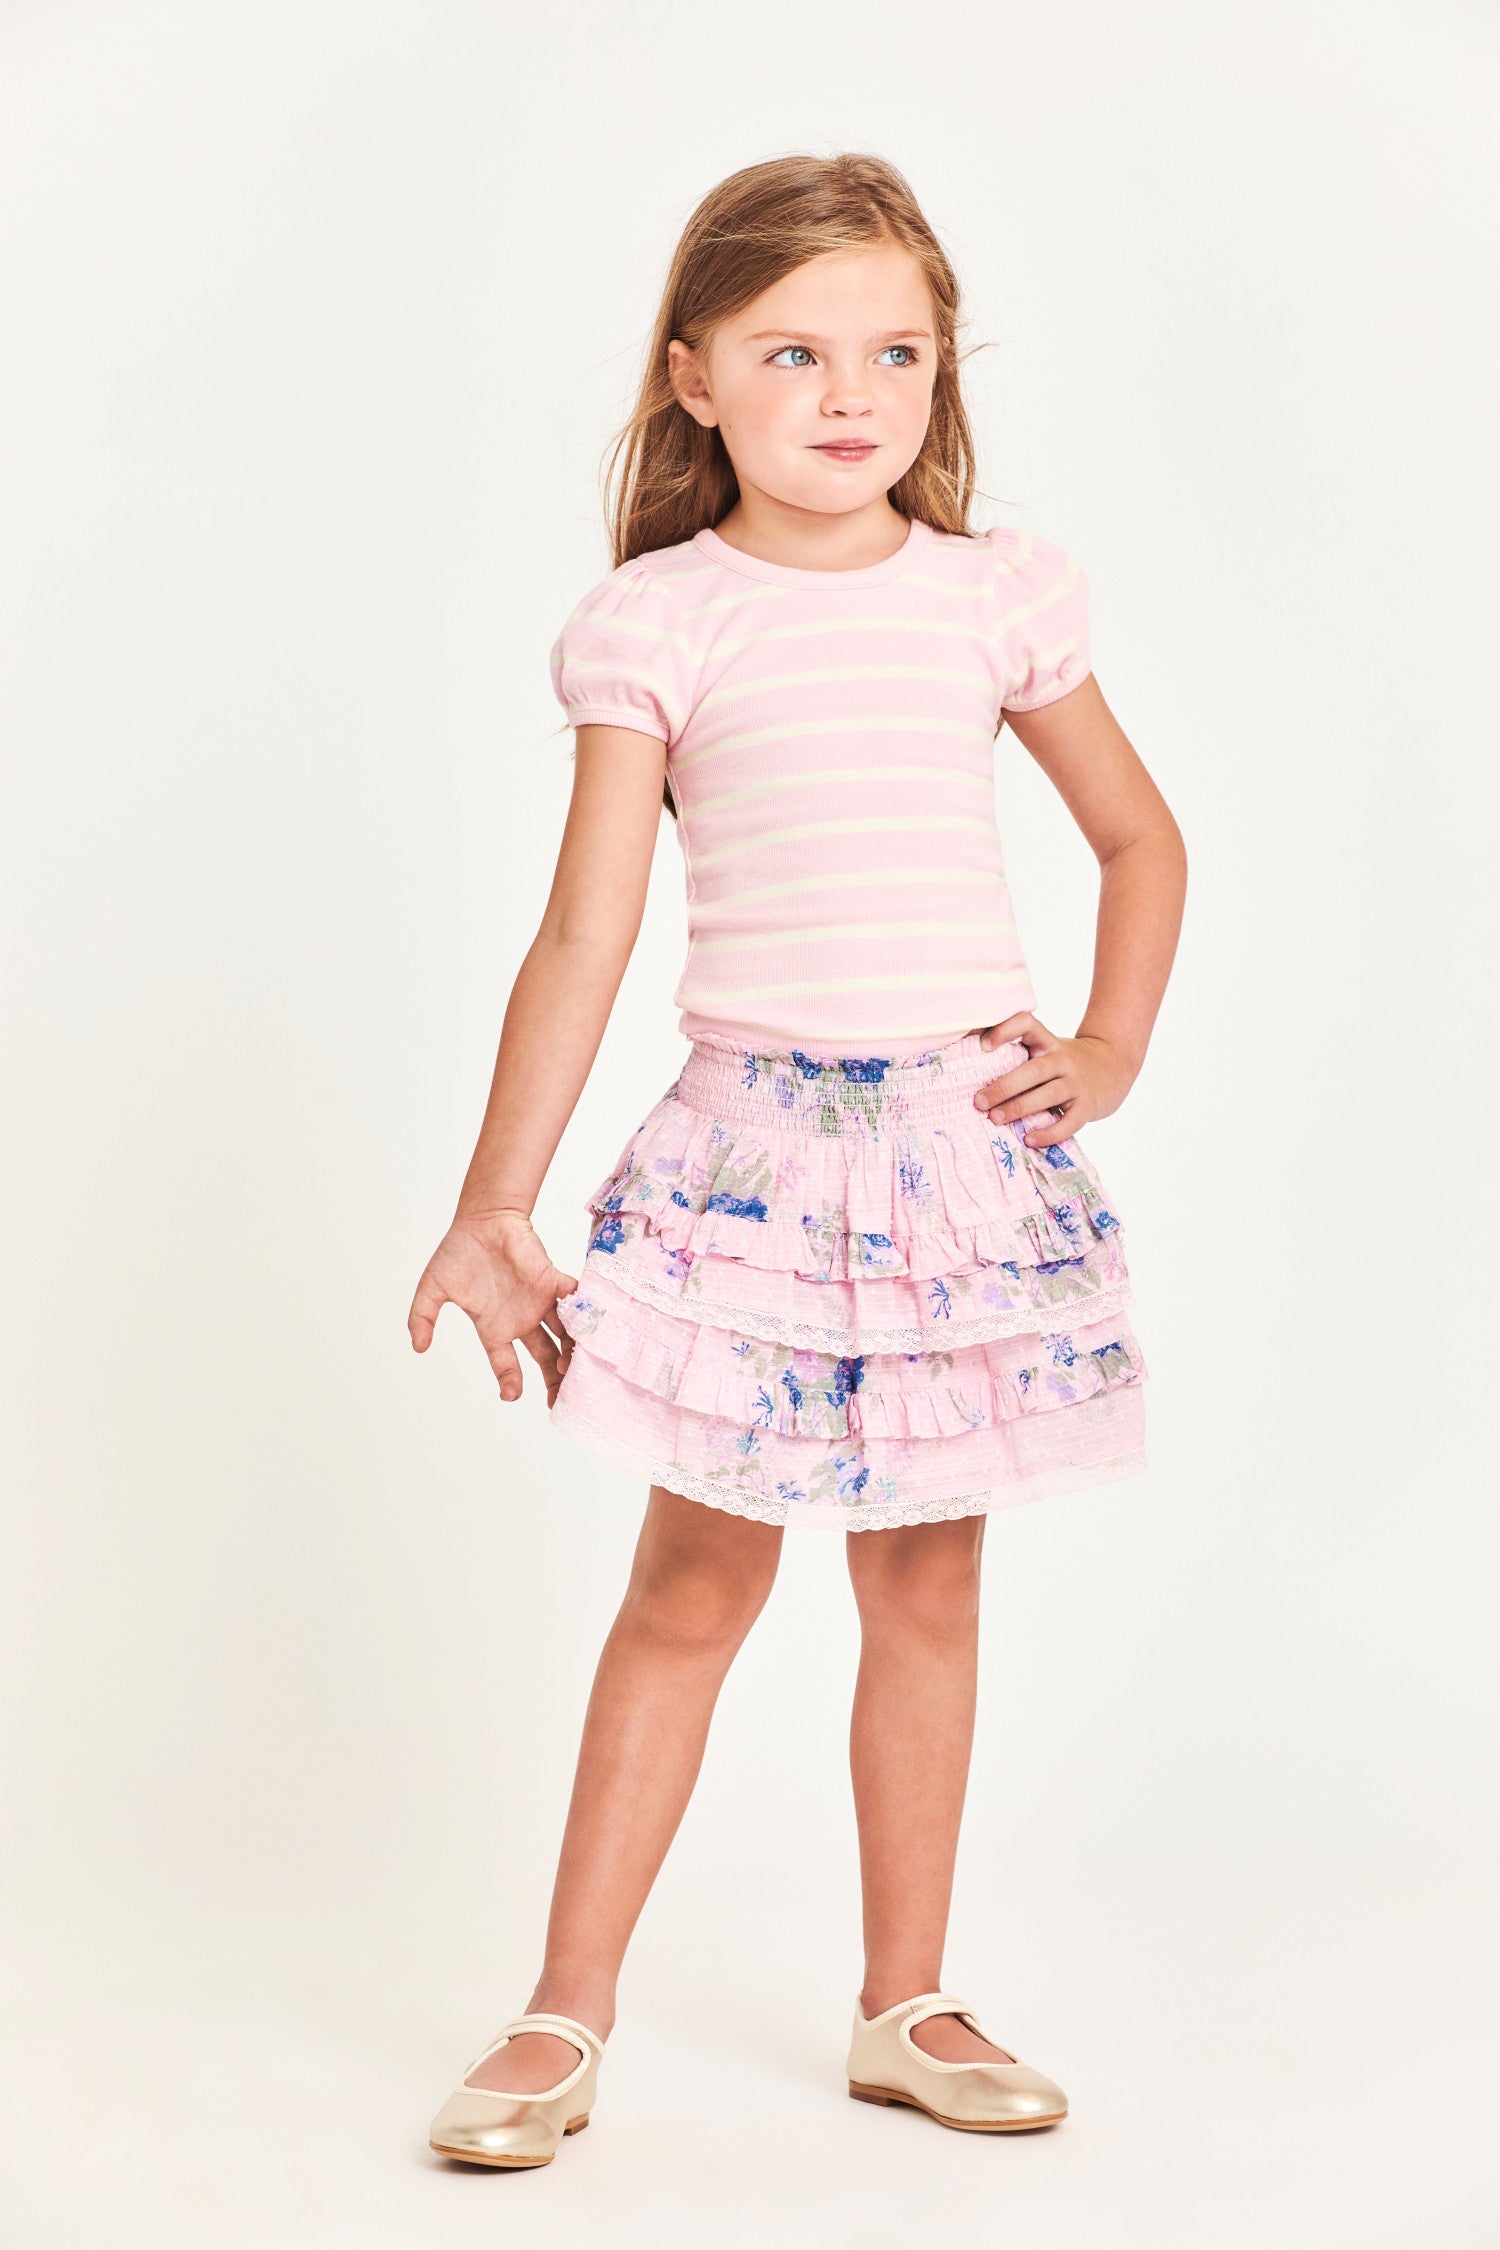 The Billie Skirt is 100% cotton and features a wide smocked waistband with two shirred tiers and ruffle detailing. It is a beautiful baby pink with blue flower detailing.  